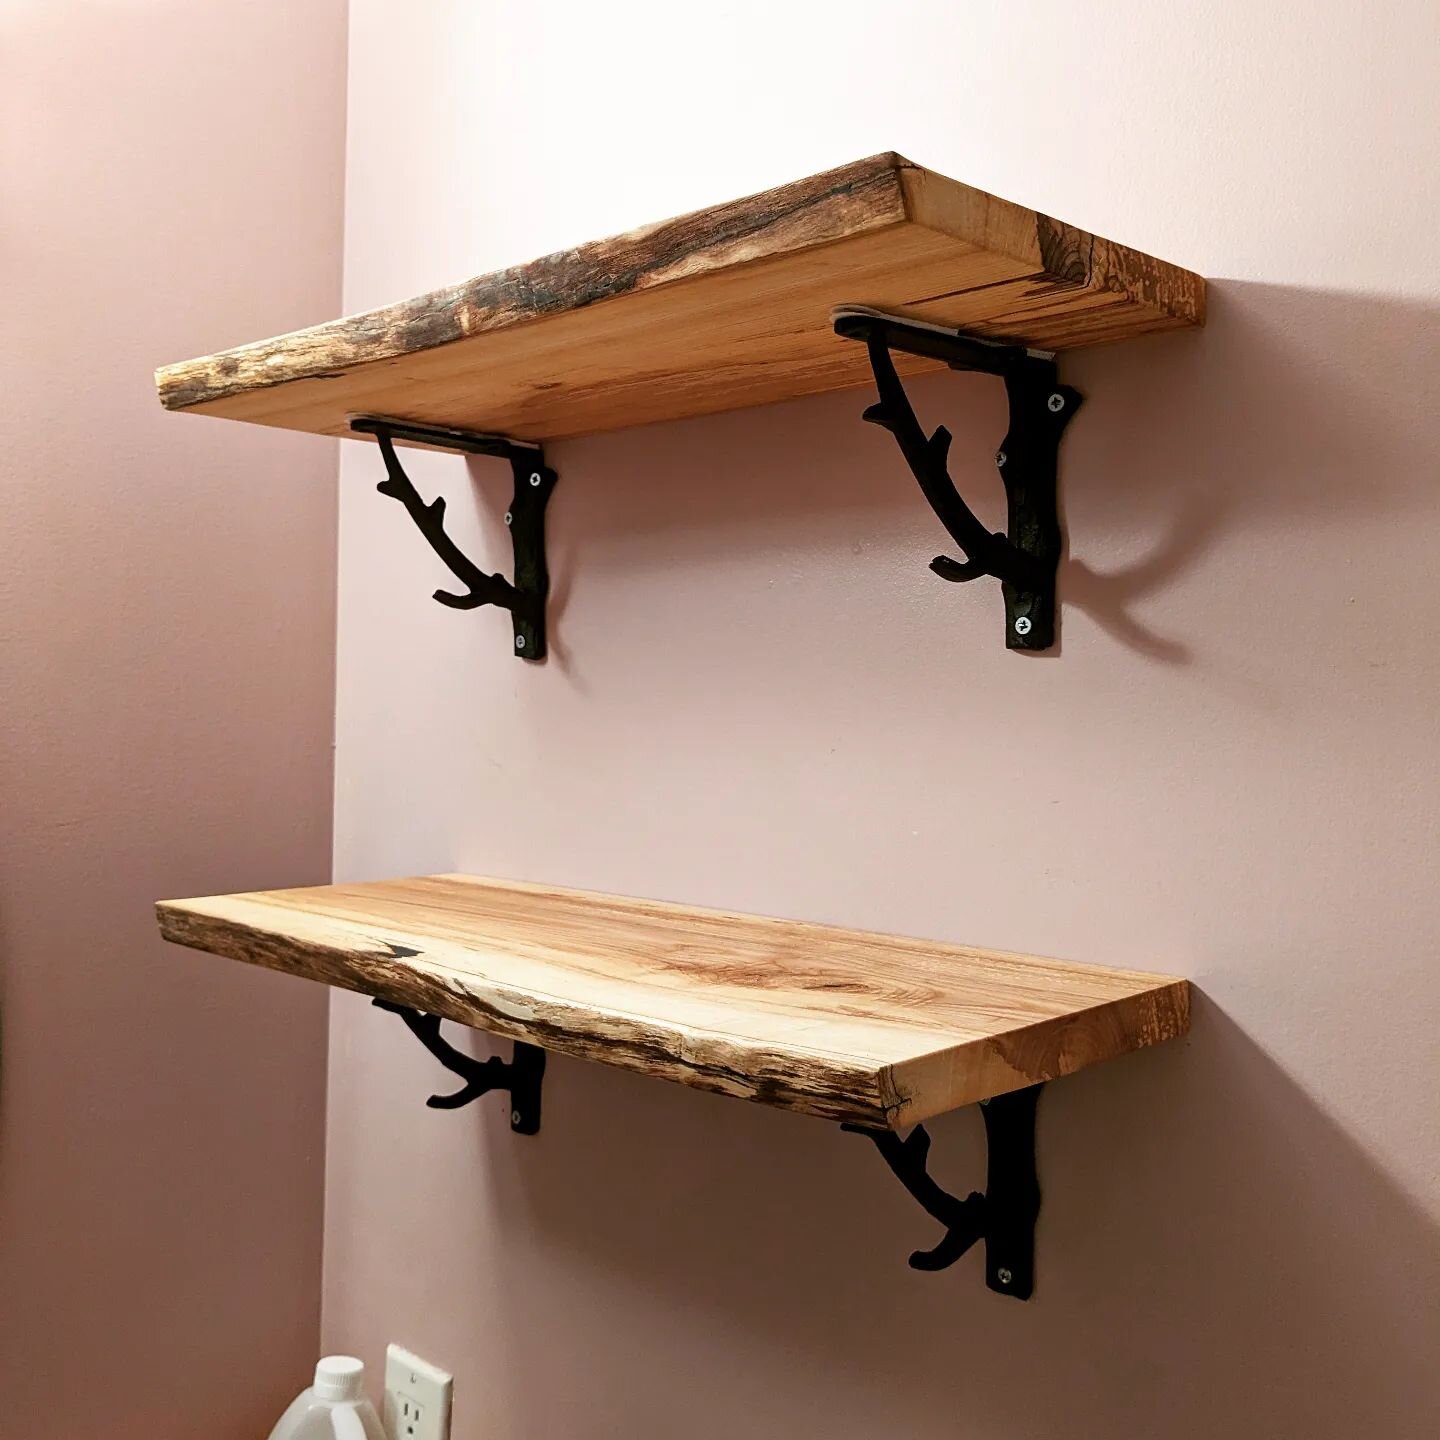 Ash shelves paired with the tree branch hooks. Nice!